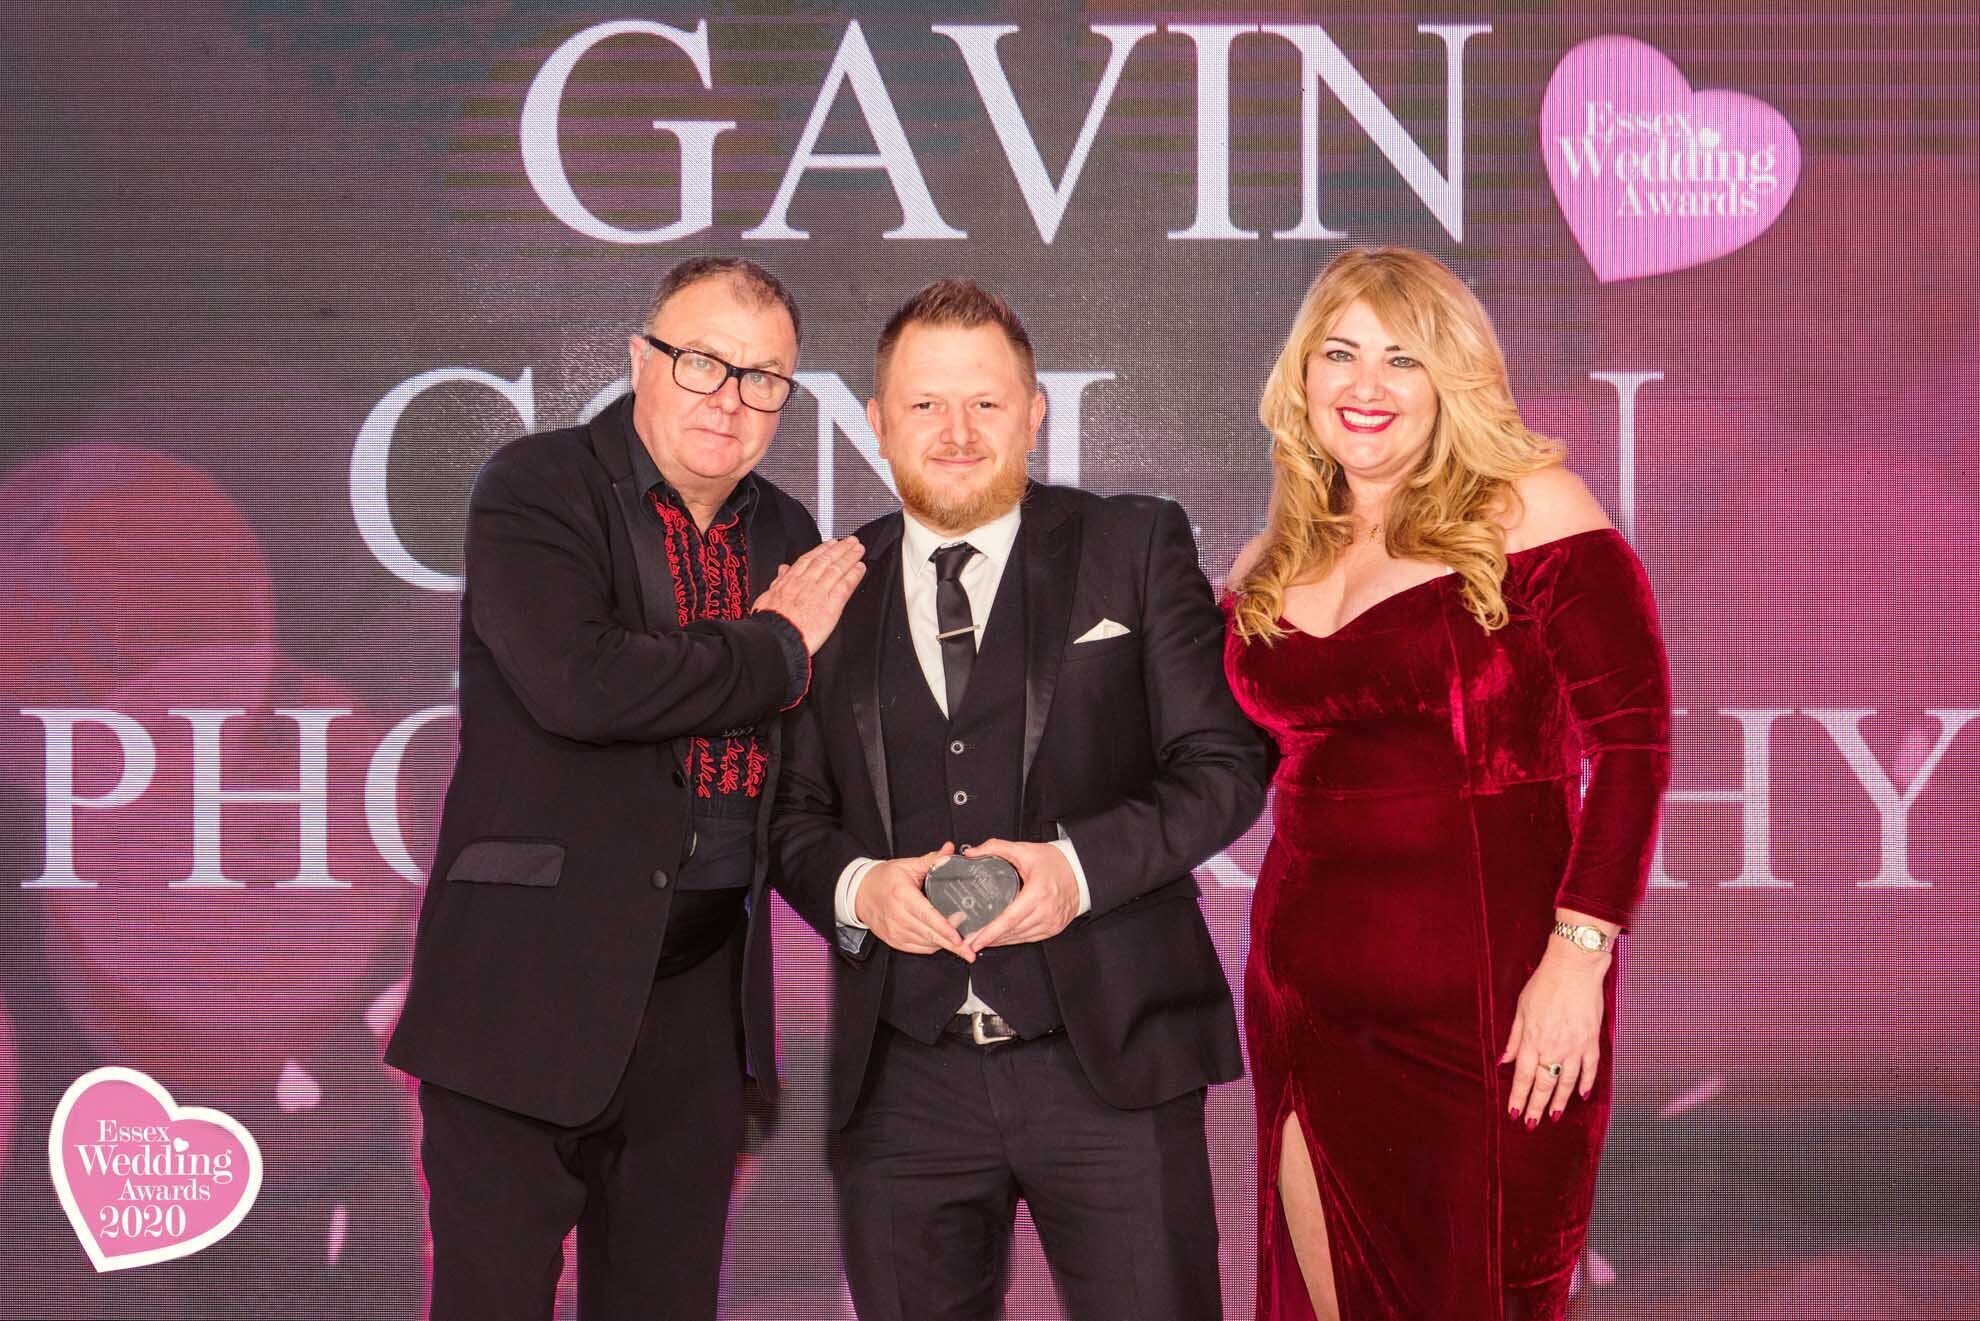 Essex Wedding Awards - gavin conlan photography wins Highly Commended Wedding Photographer of the Year